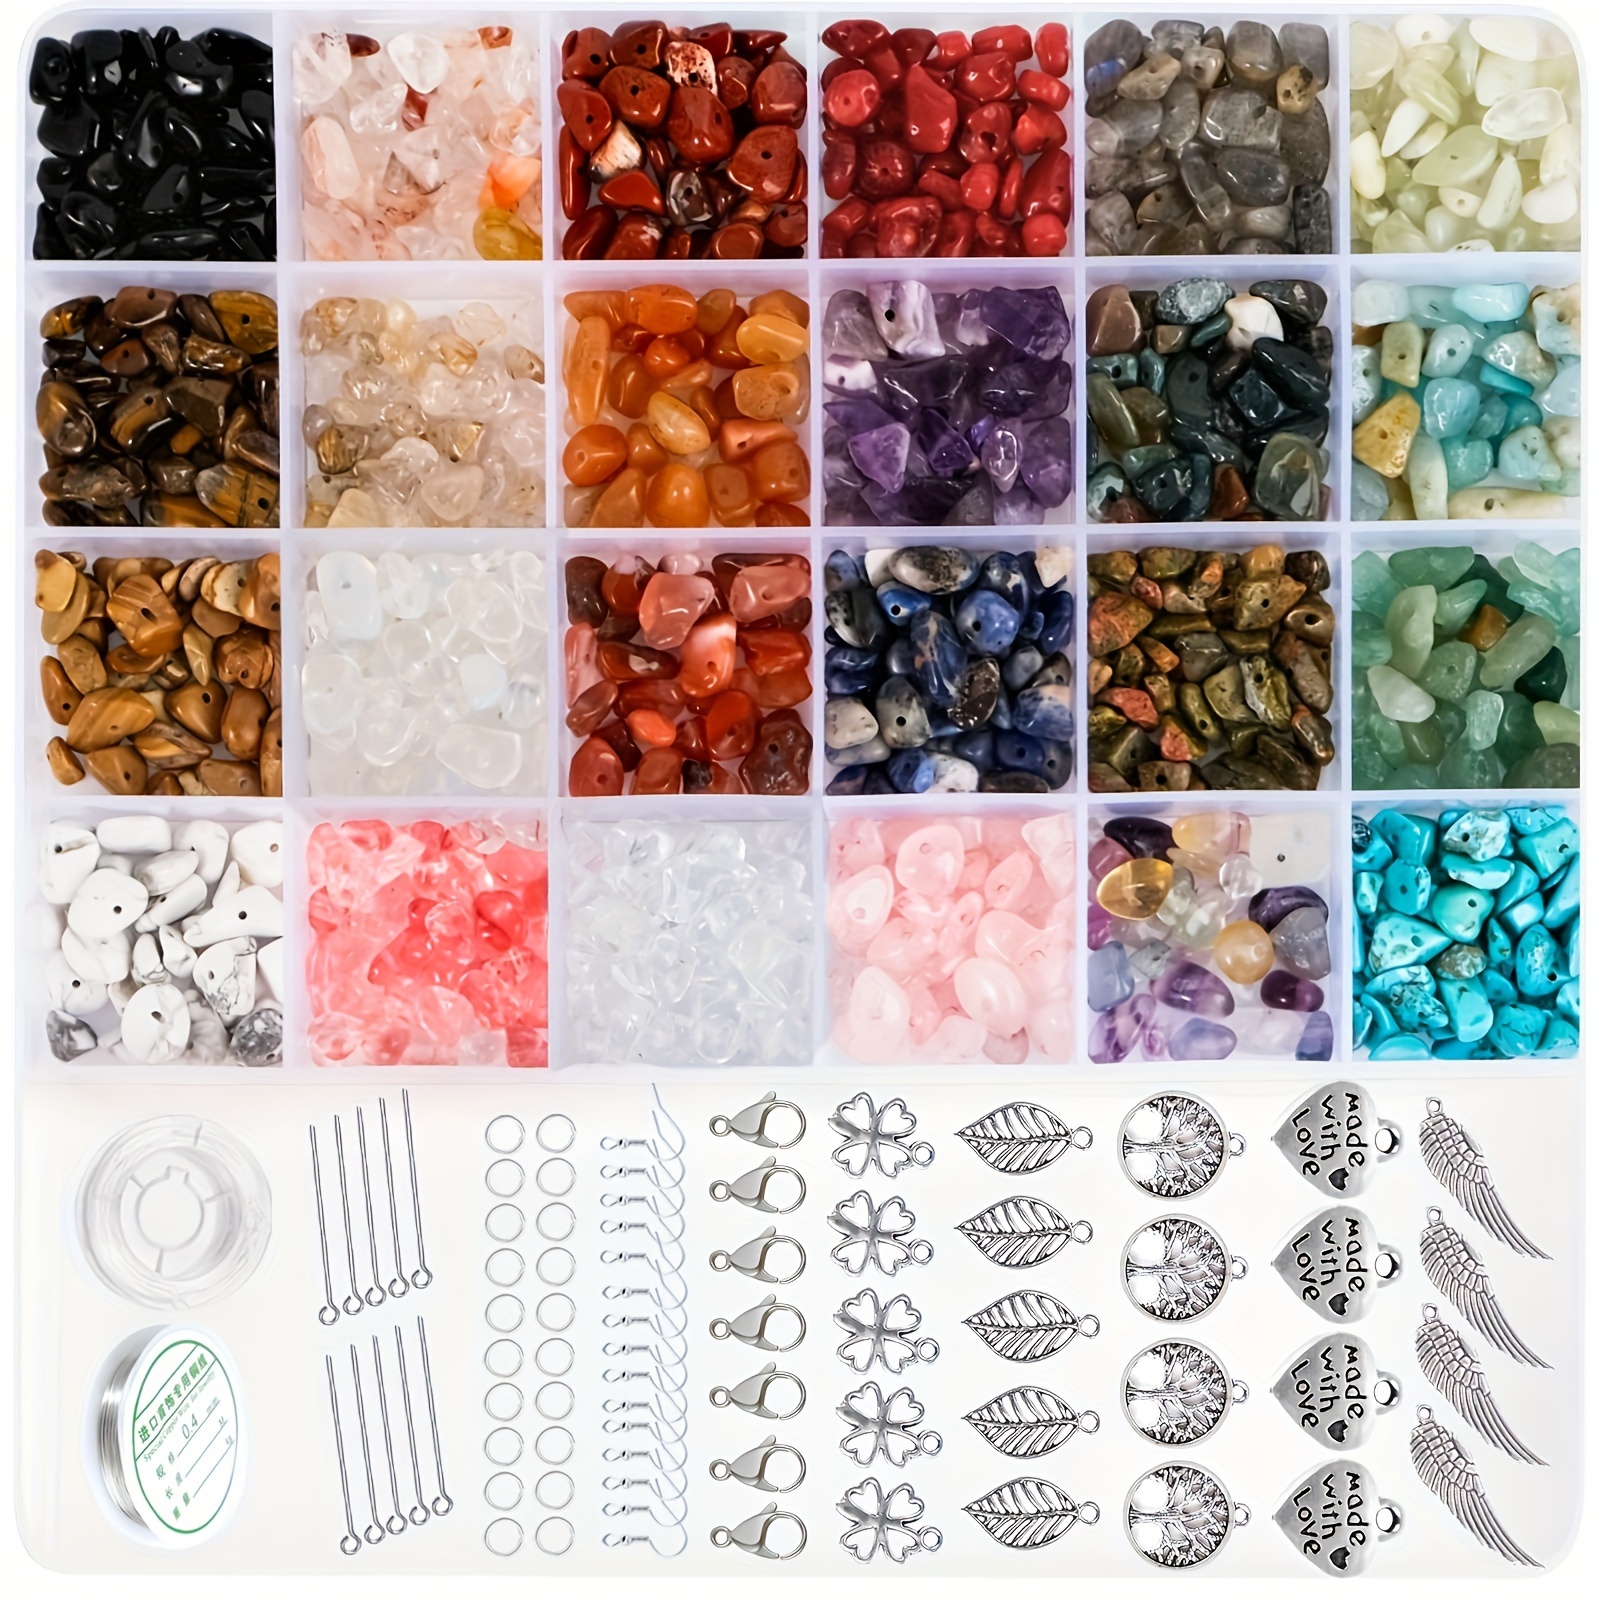 

700pcs Elegant Beading Kit With Natural Irregular Stone Beads, Copper Wire, & 193pcs Metal Accessories - Diy Jewelry Making Set With Plant Details, Copper & Stone Material